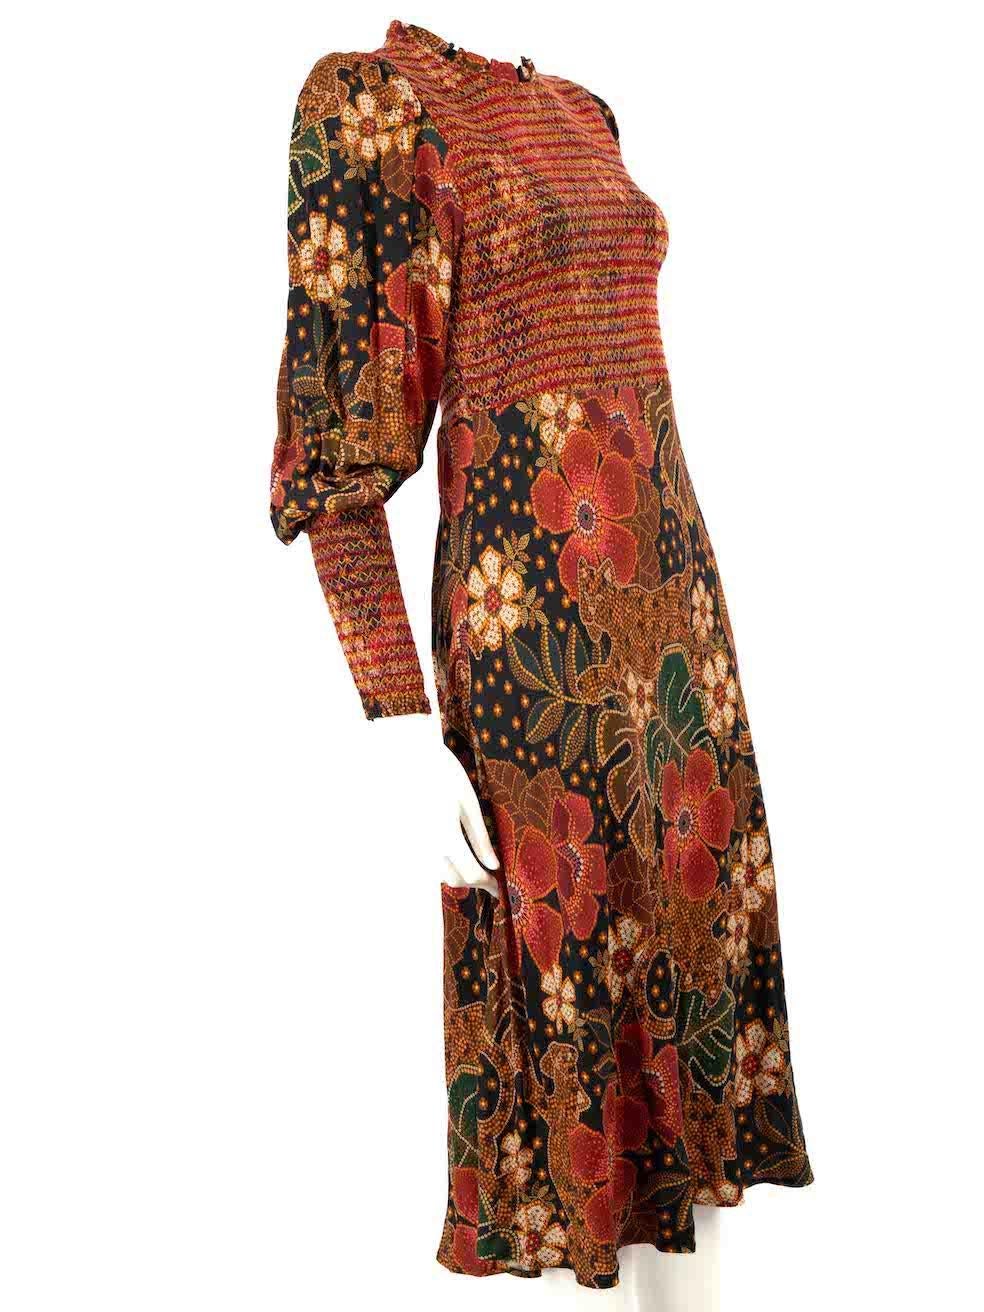 CONDITION is Never worn, with tags. No visible wear to dress is evident on this new FARM Rio designer resale item.
 
 
 
 Details
 
 
 Orange
 
 Viscose
 
 Dress
 
 Floral print
 
 Midi
 
 Long sleeves
 
 Ruched top and cuffs
 
 Round neck
 
 Back